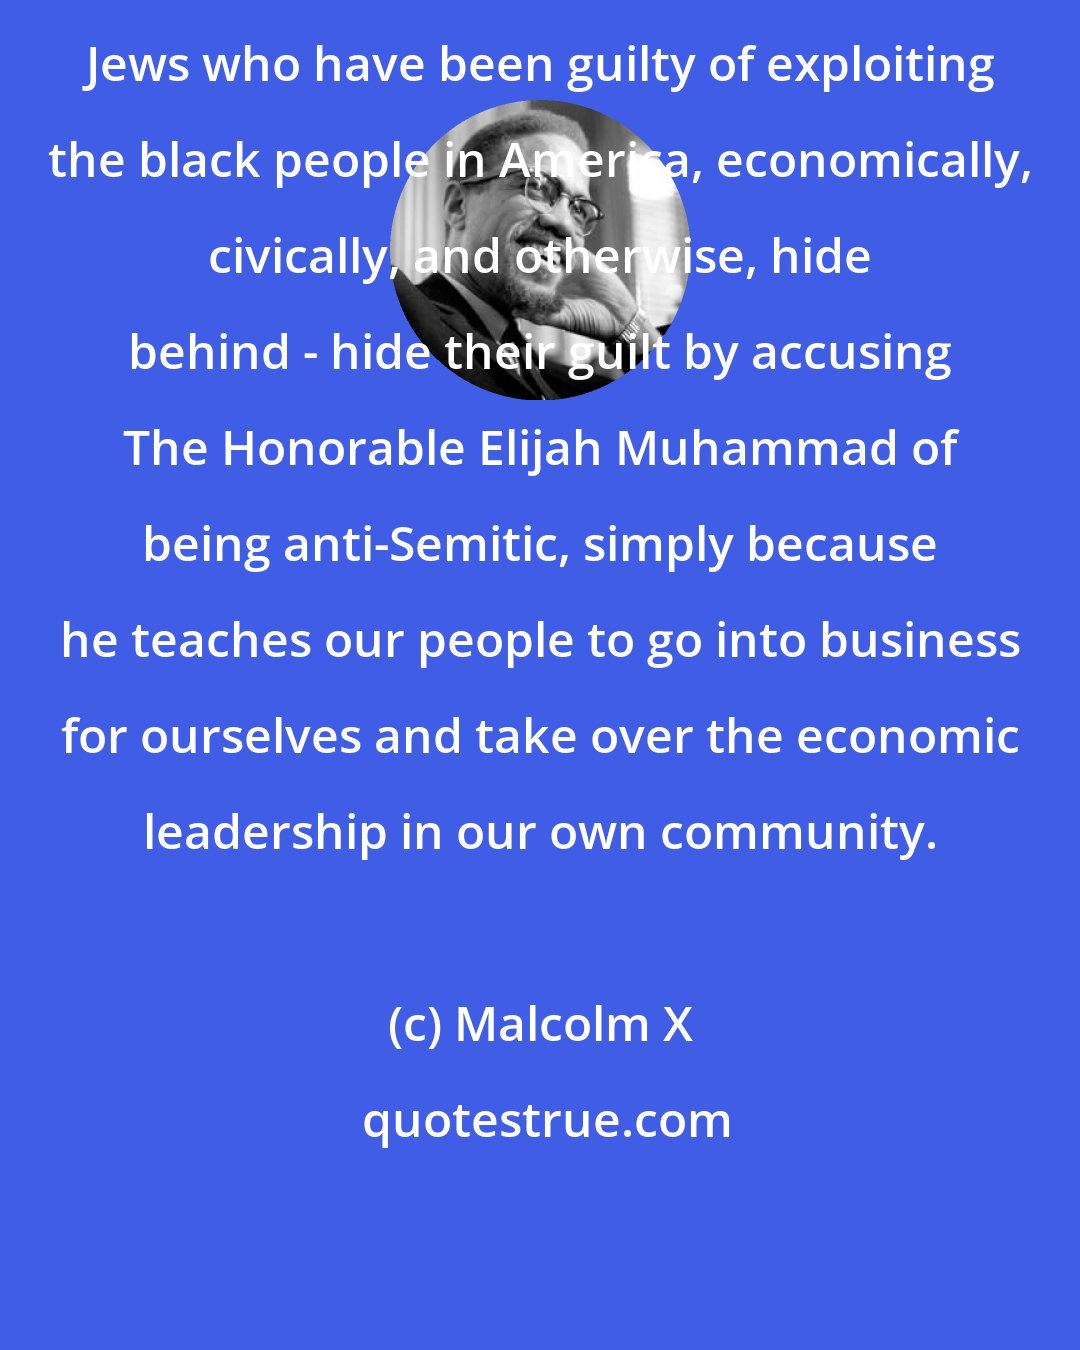 Malcolm X: Jews who have been guilty of exploiting the black people in America, economically, civically, and otherwise, hide behind - hide their guilt by accusing The Honorable Elijah Muhammad of being anti-Semitic, simply because he teaches our people to go into business for ourselves and take over the economic leadership in our own community.